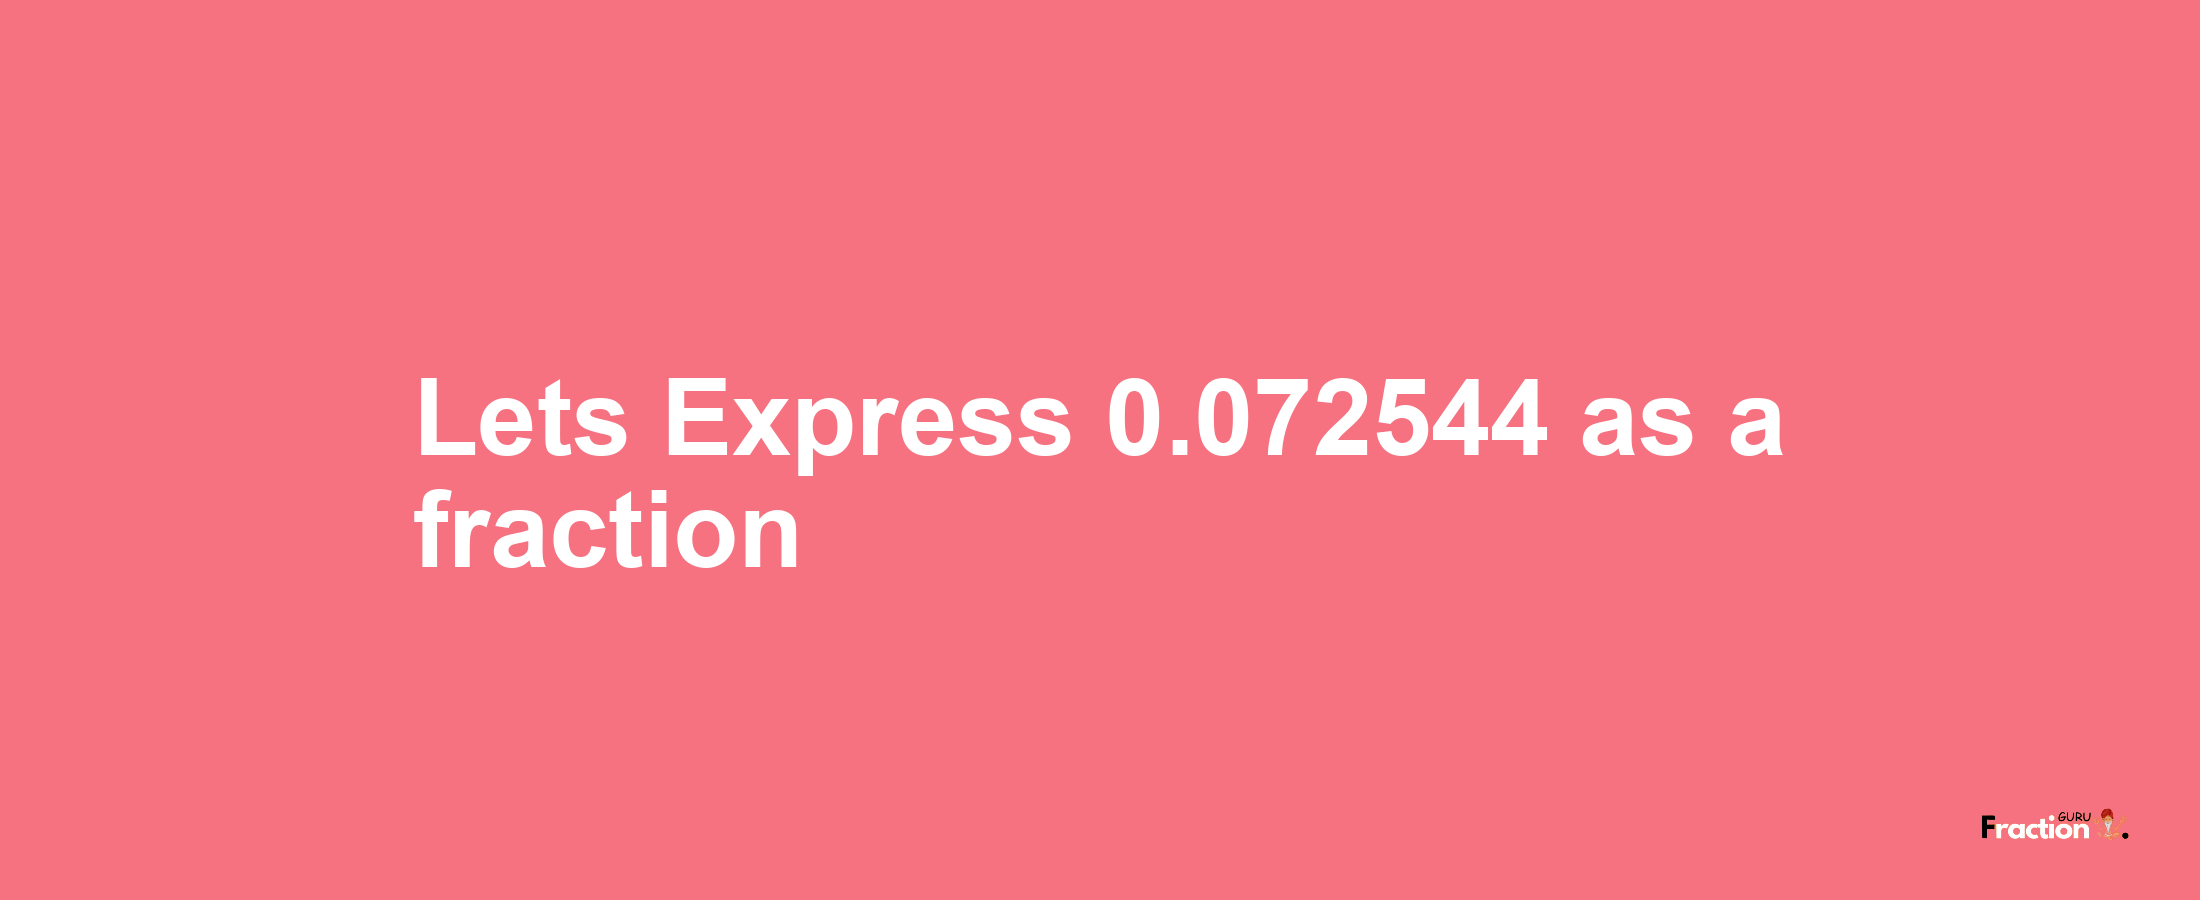 Lets Express 0.072544 as afraction